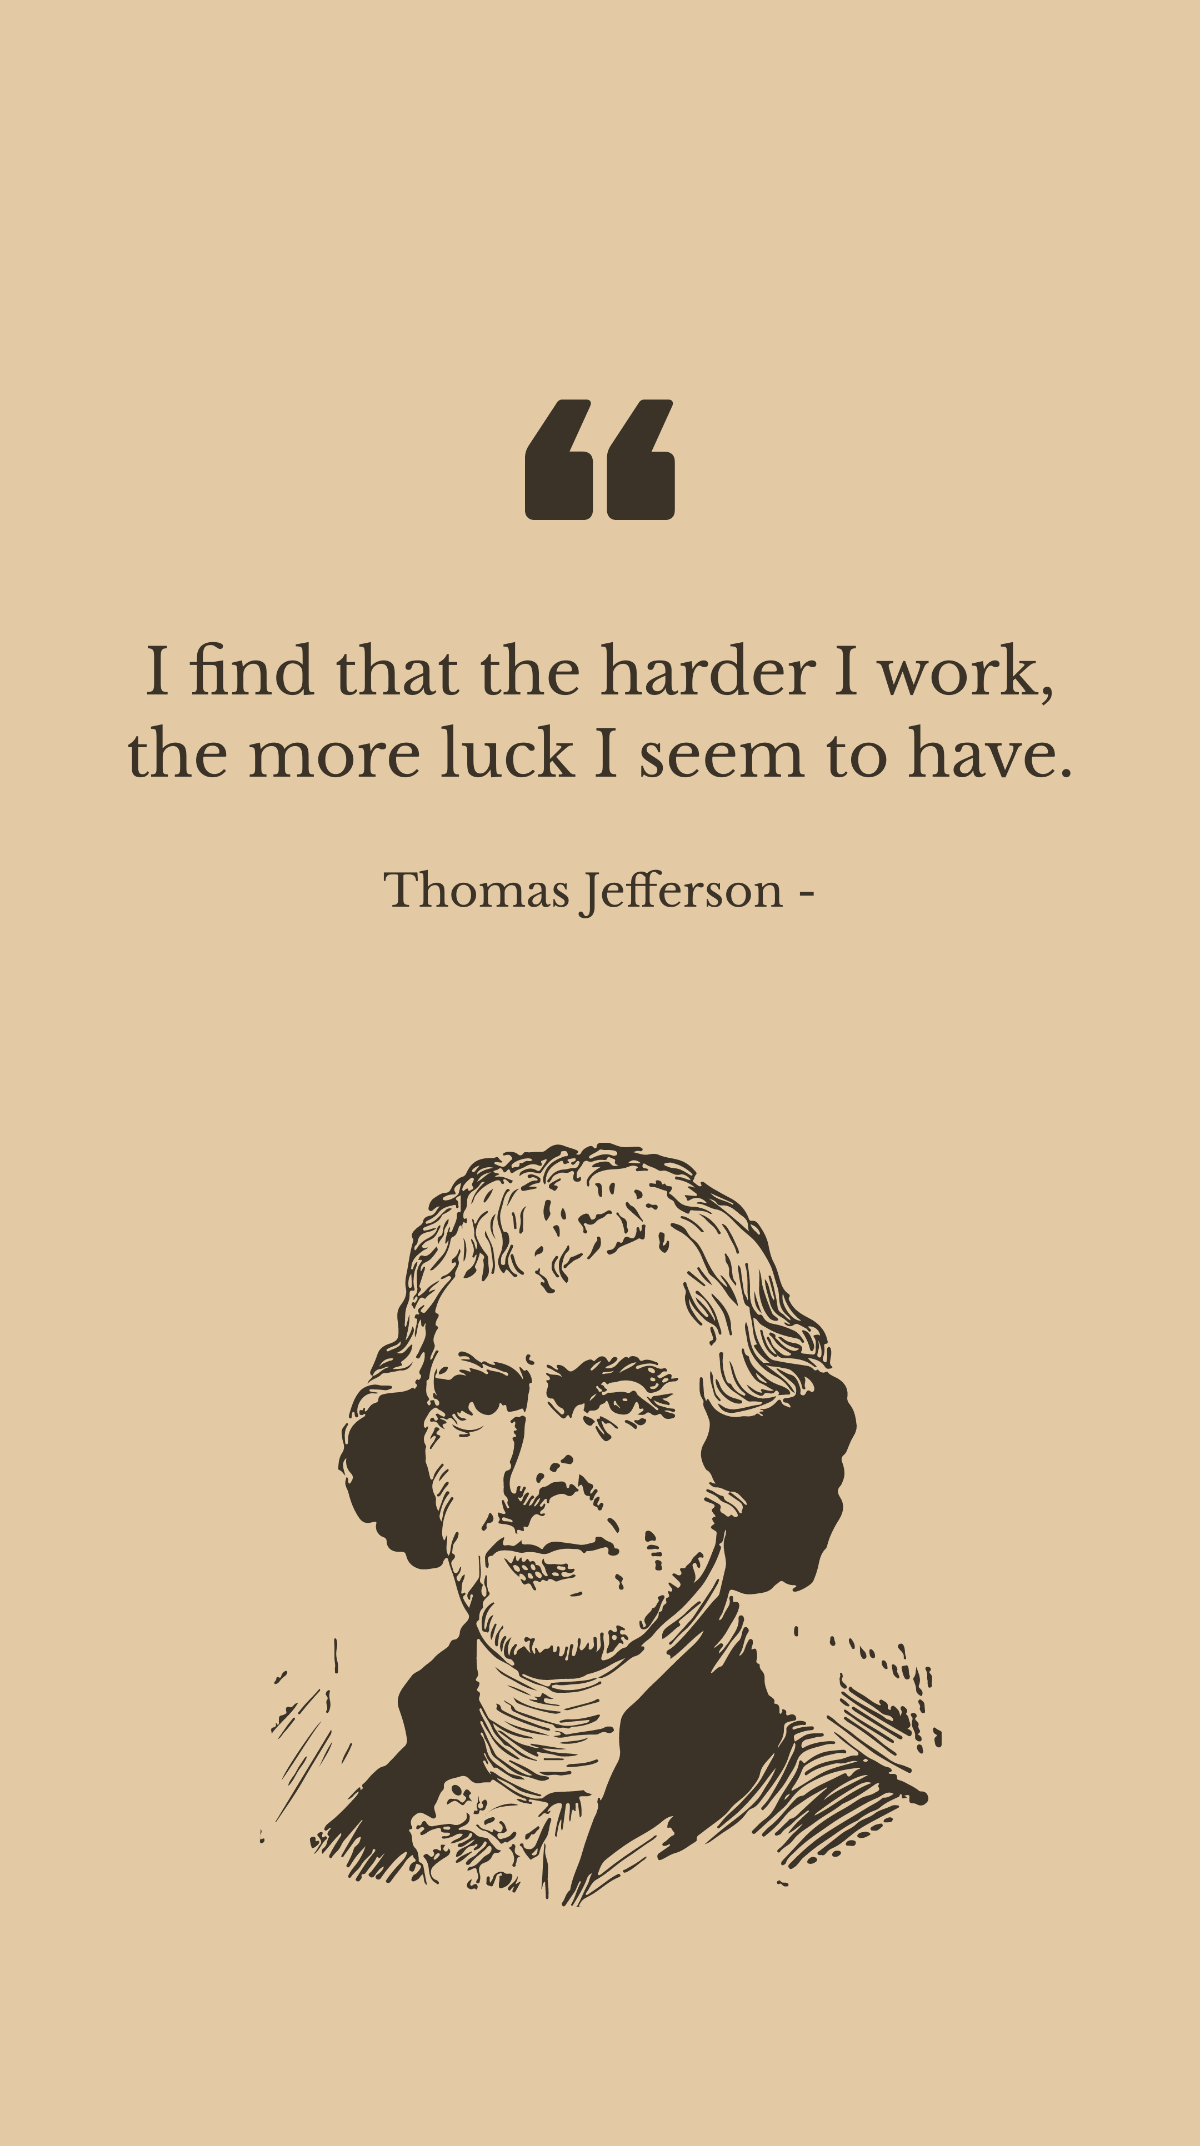 Thomas Jefferson - I find that the harder I work, the more luck I seem to have. Template